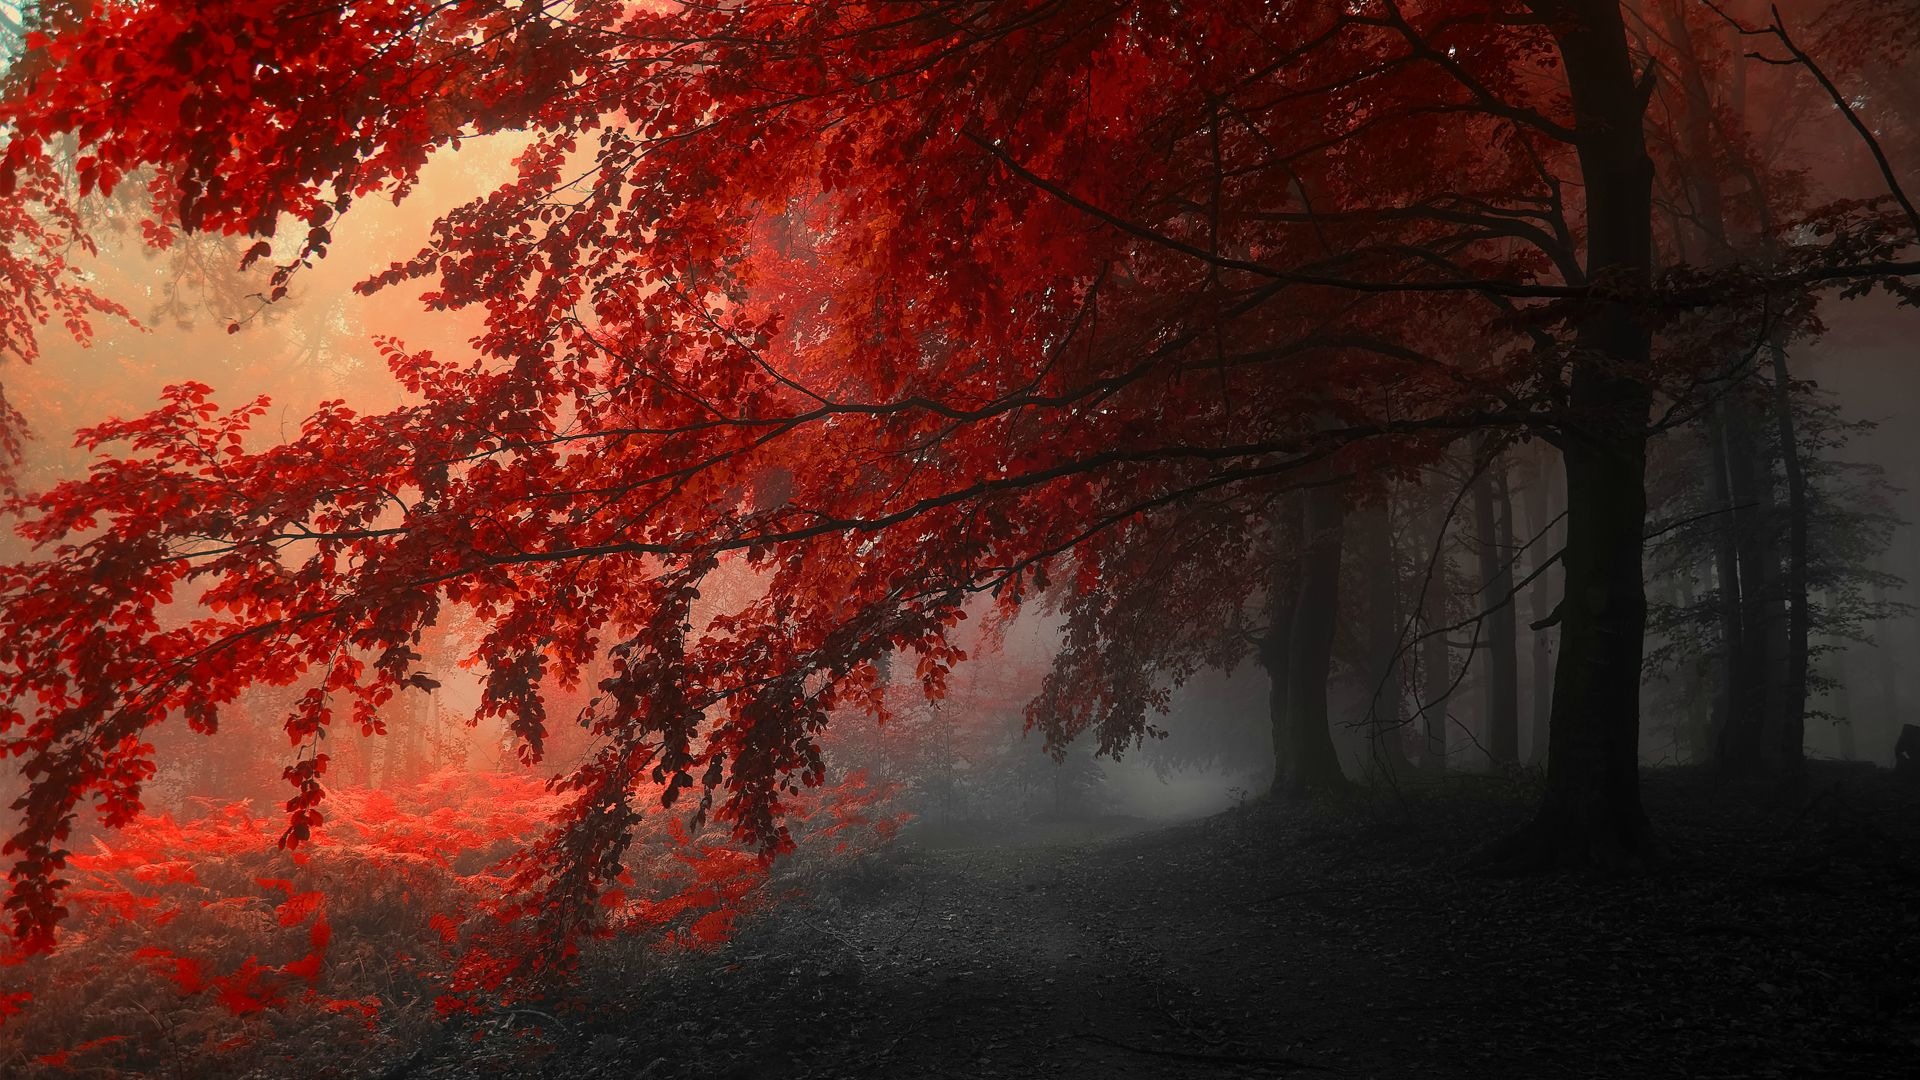 Autumn red leaves forest trees HD wallpaper #14 - 1920x1080